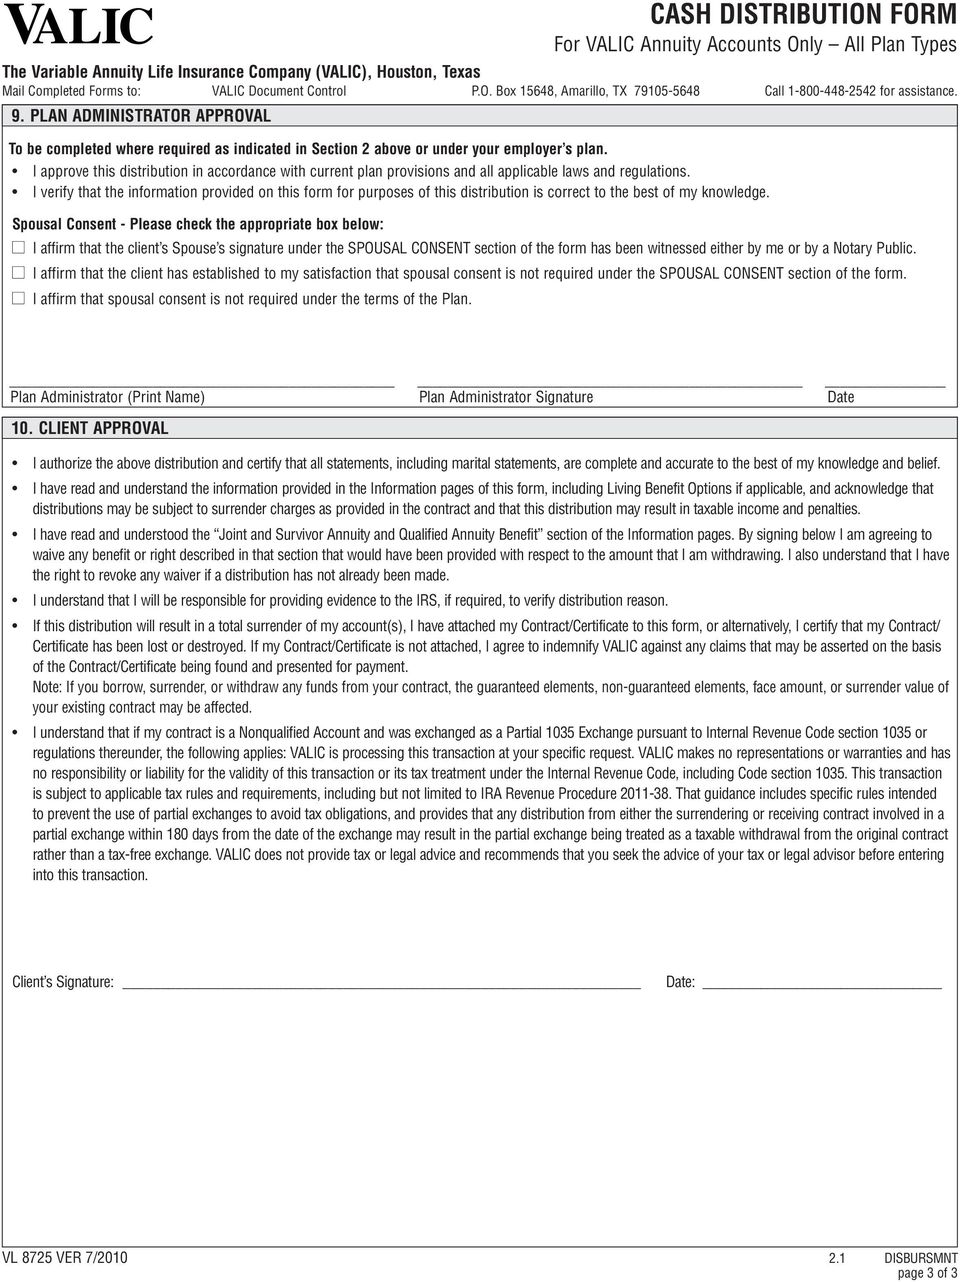 Cash Distribution Form For Valic Annuity Accounts Only All Plan Types Pdf Free Download